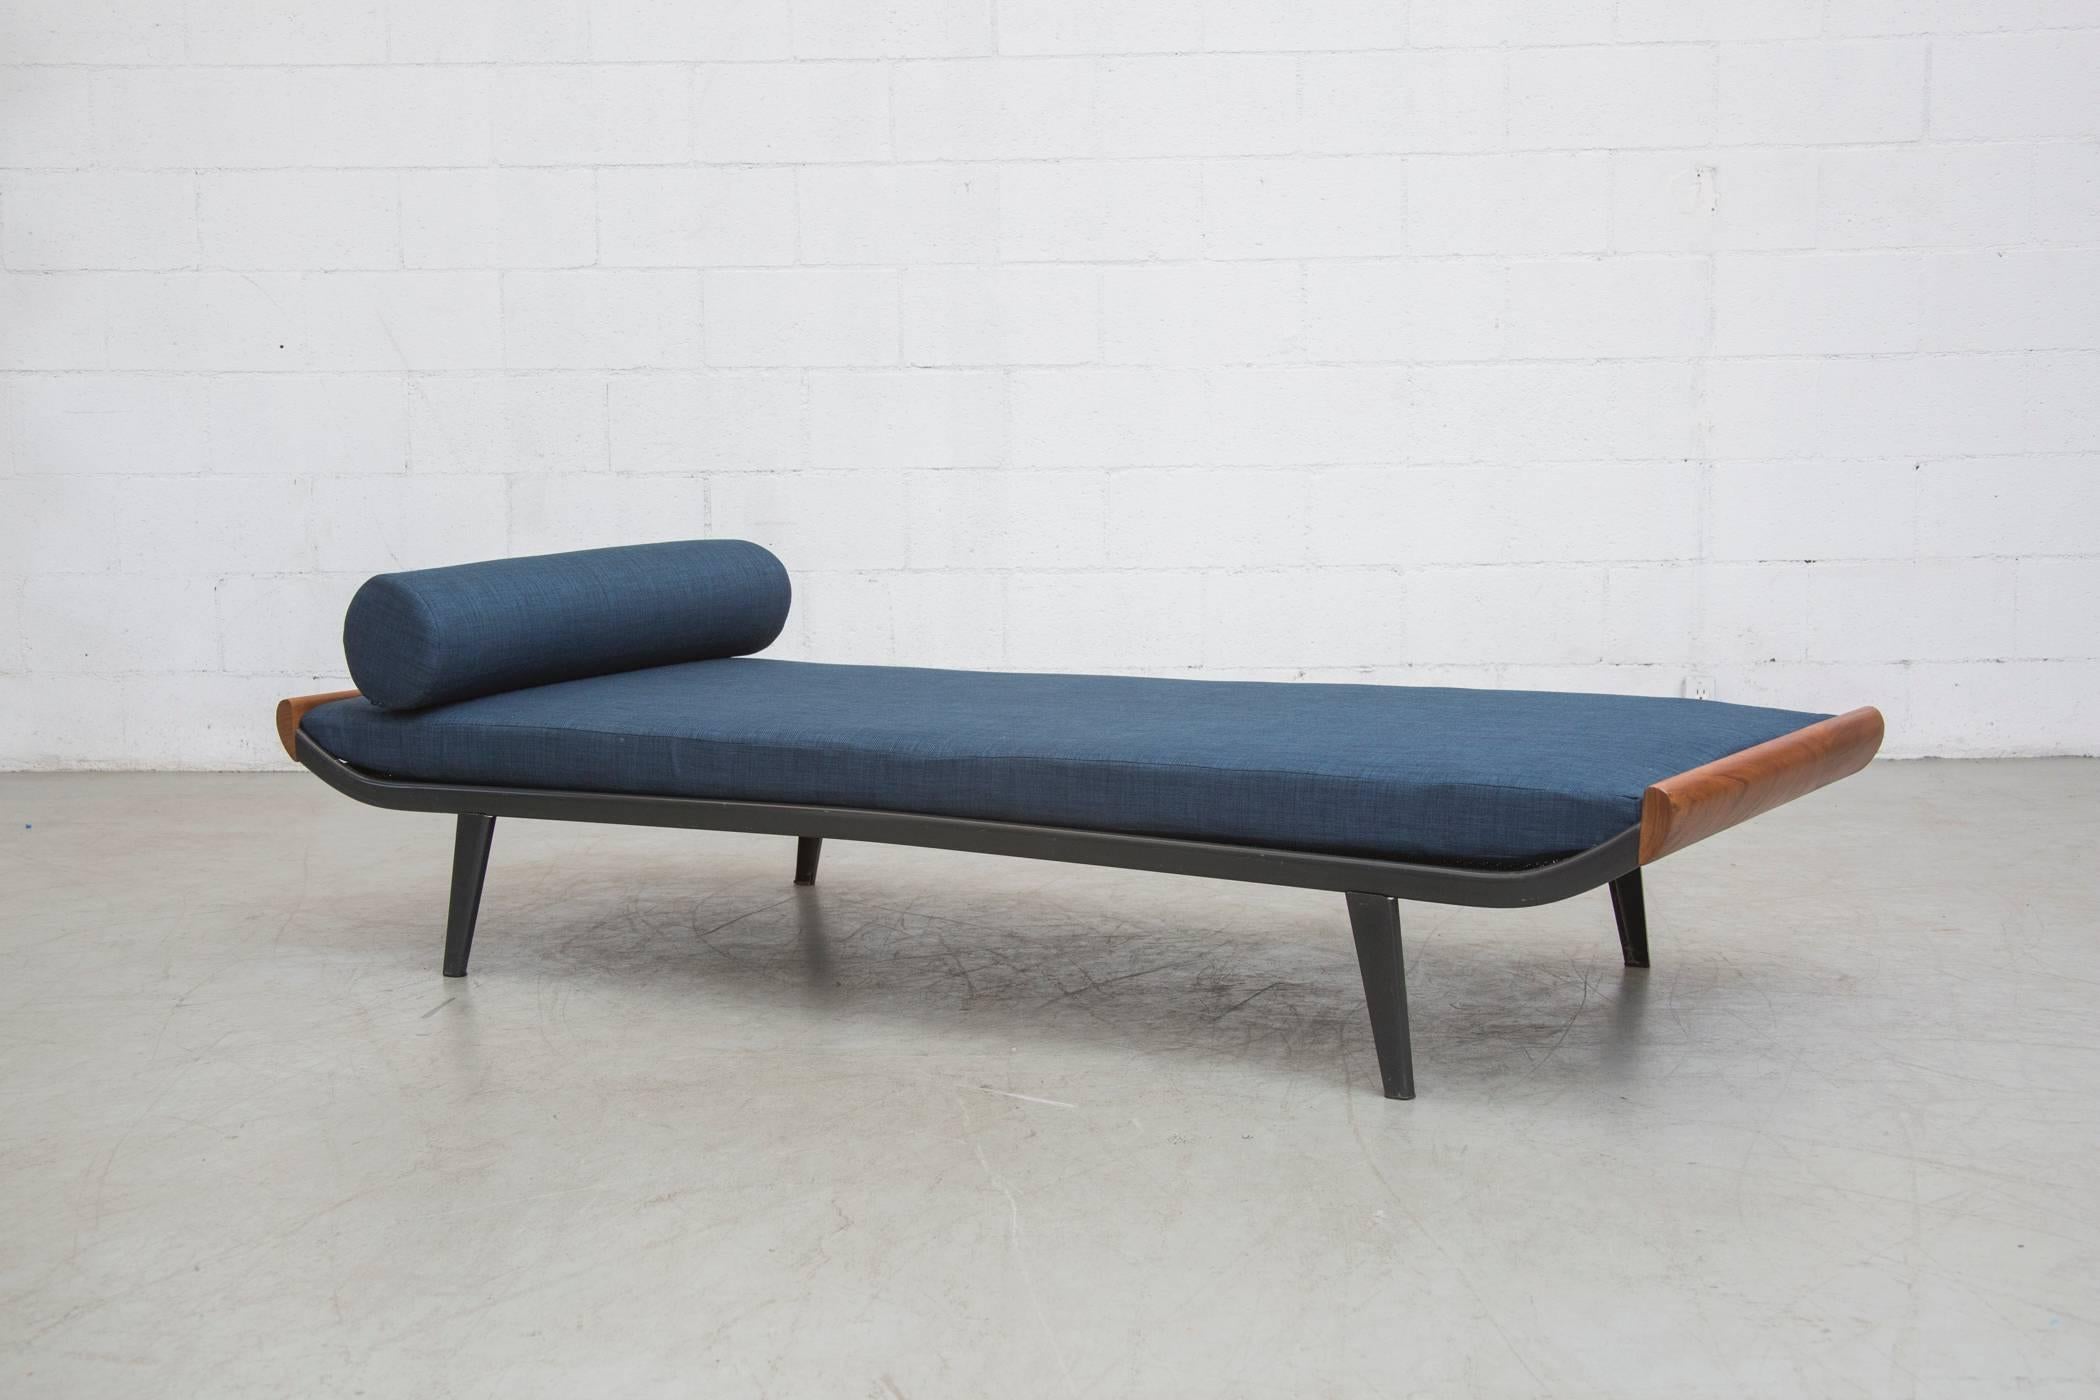 1960s Cleopatra Day Bed by A.R. Cordemeijer. Teakwood ends with enameled dark grey metal frame and 